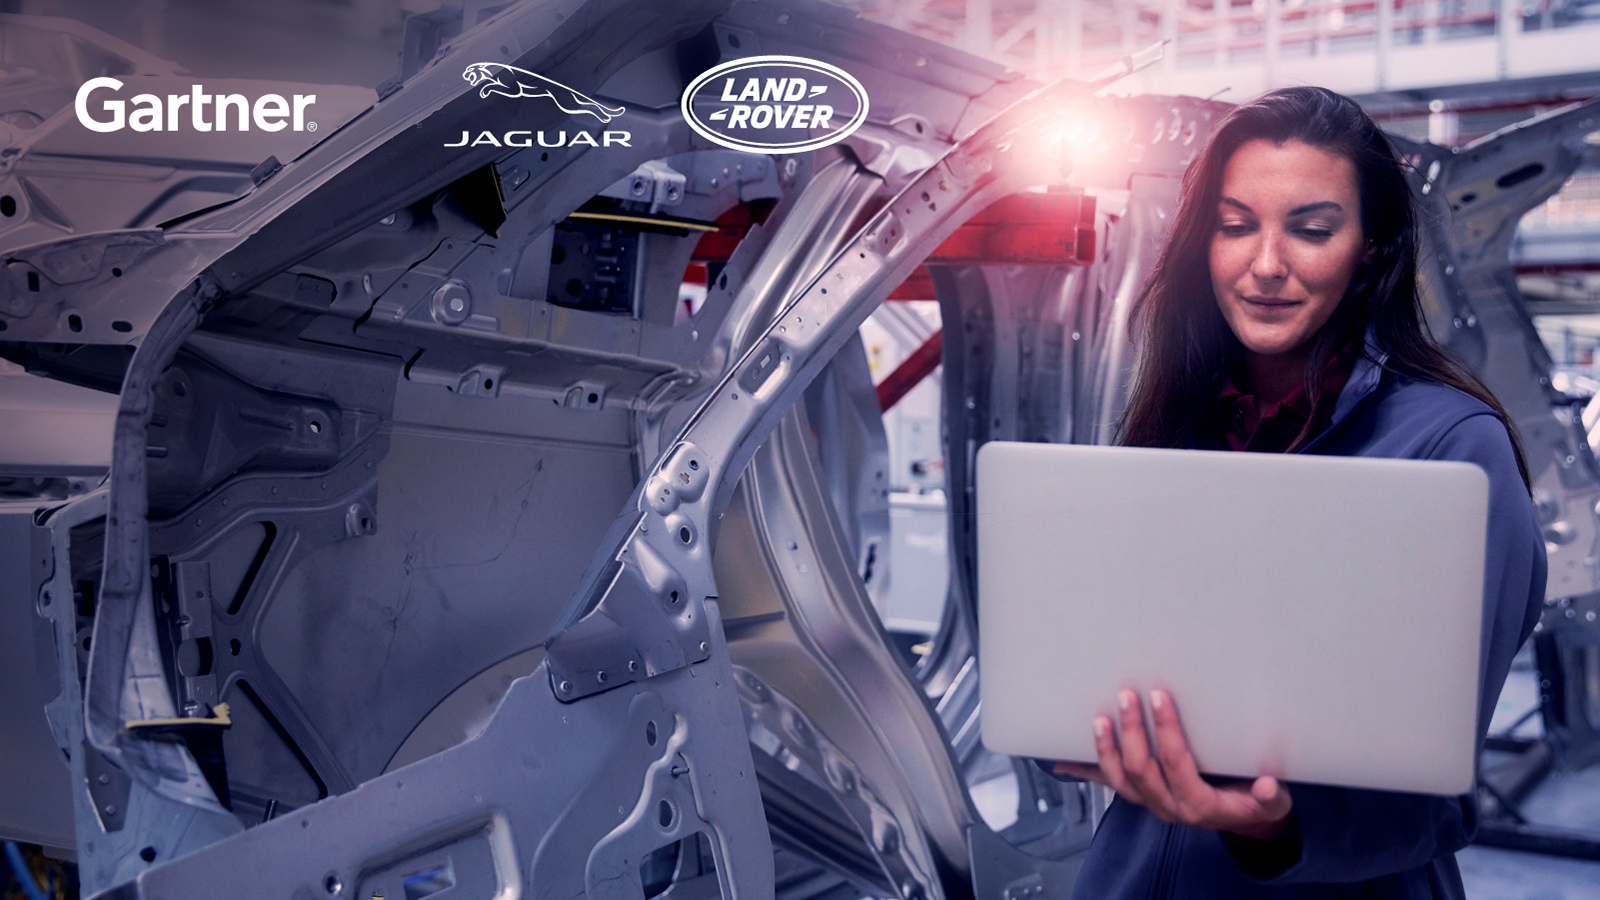 Graphic: Gartner Jaguar Land Rover logos on image of woman working with a laptop in an automotive manufacturing plant